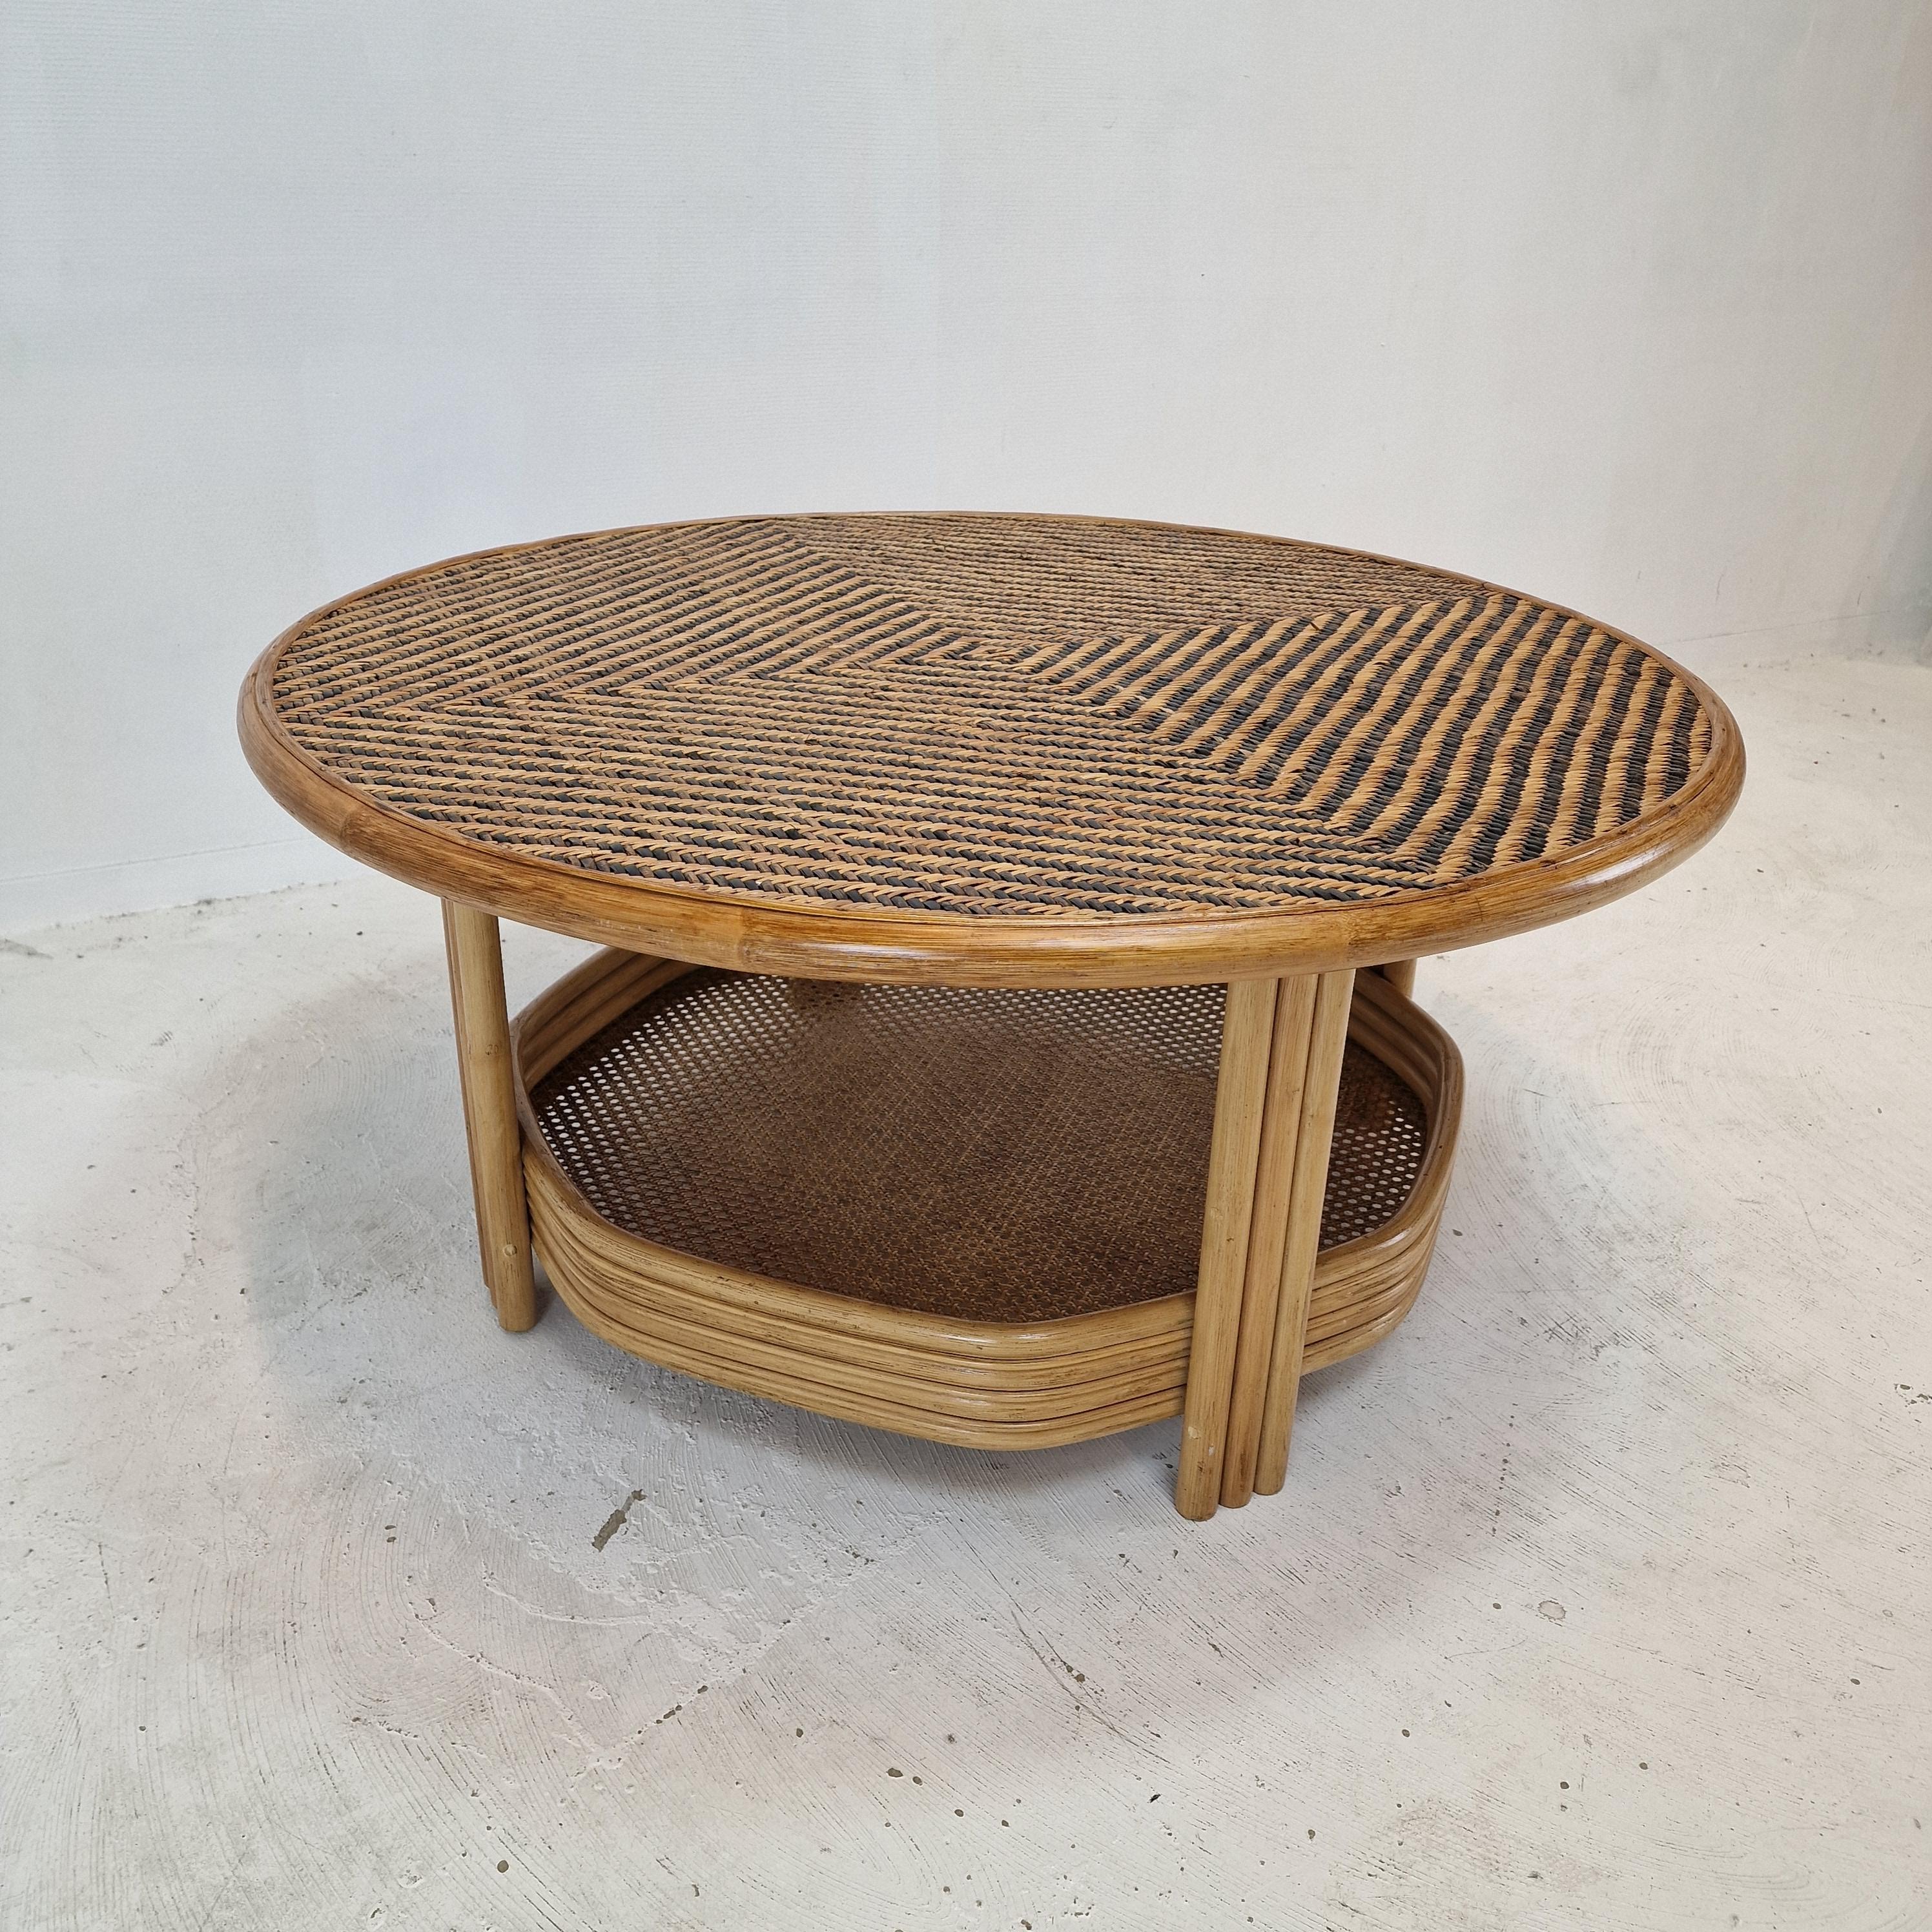 Late 20th Century Italian Wicker and Rattan Coffee Table, 1970s For Sale